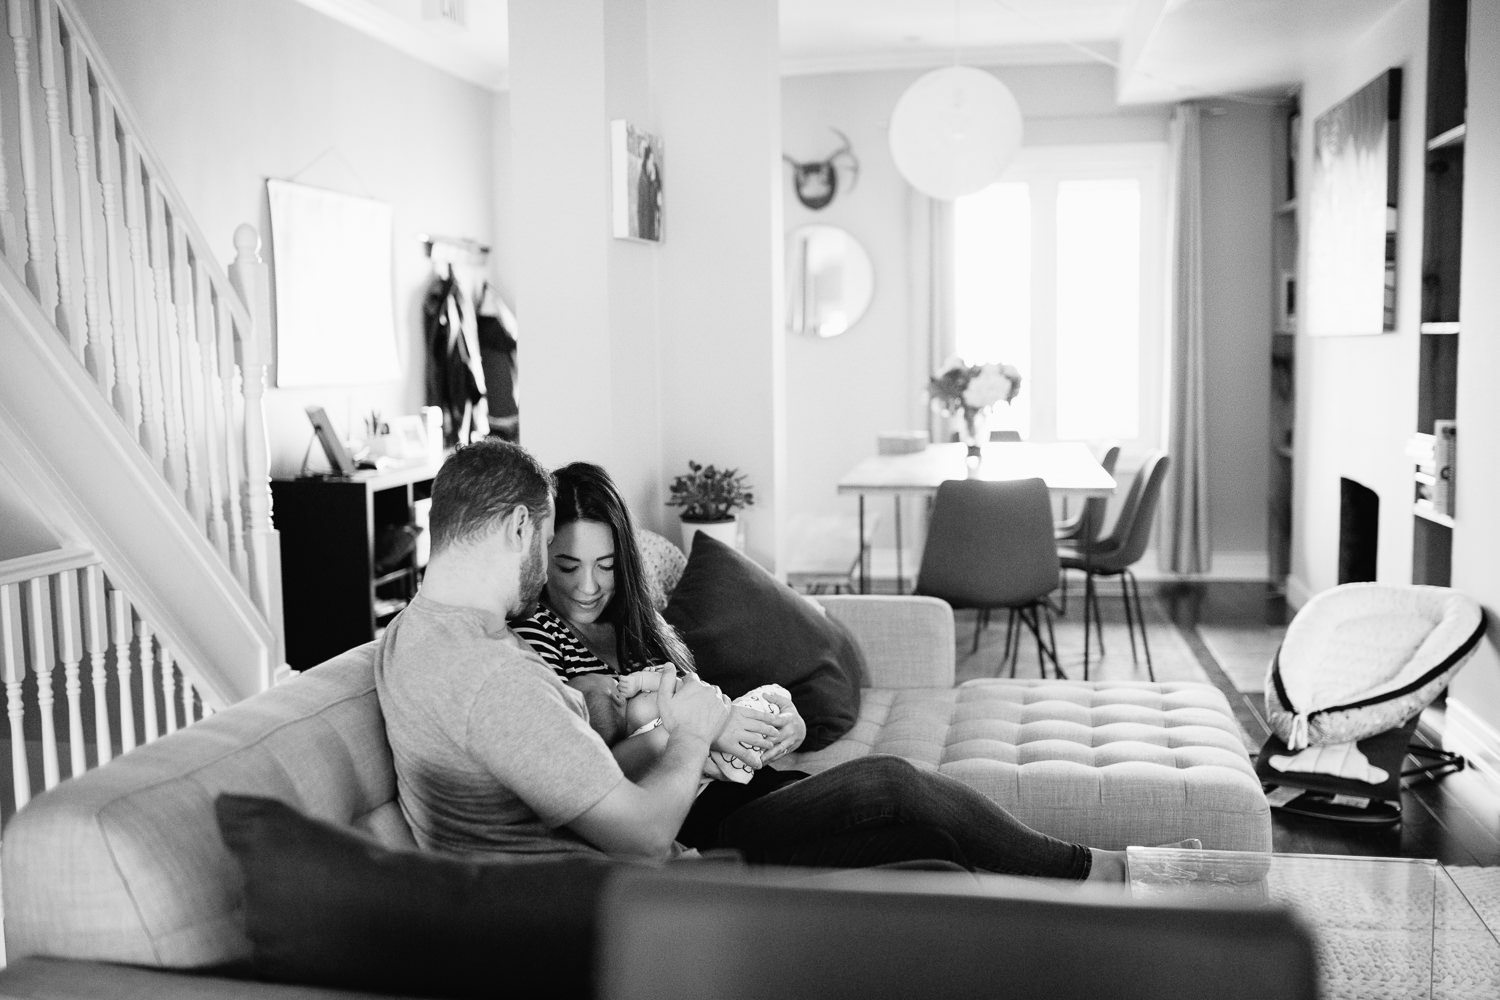 family of 3, new parents cuddle on couch, mom holding 2 week old baby girl covered with black and white swaddle, dad embracing wife and daughter - York Region Lifestyle Photos